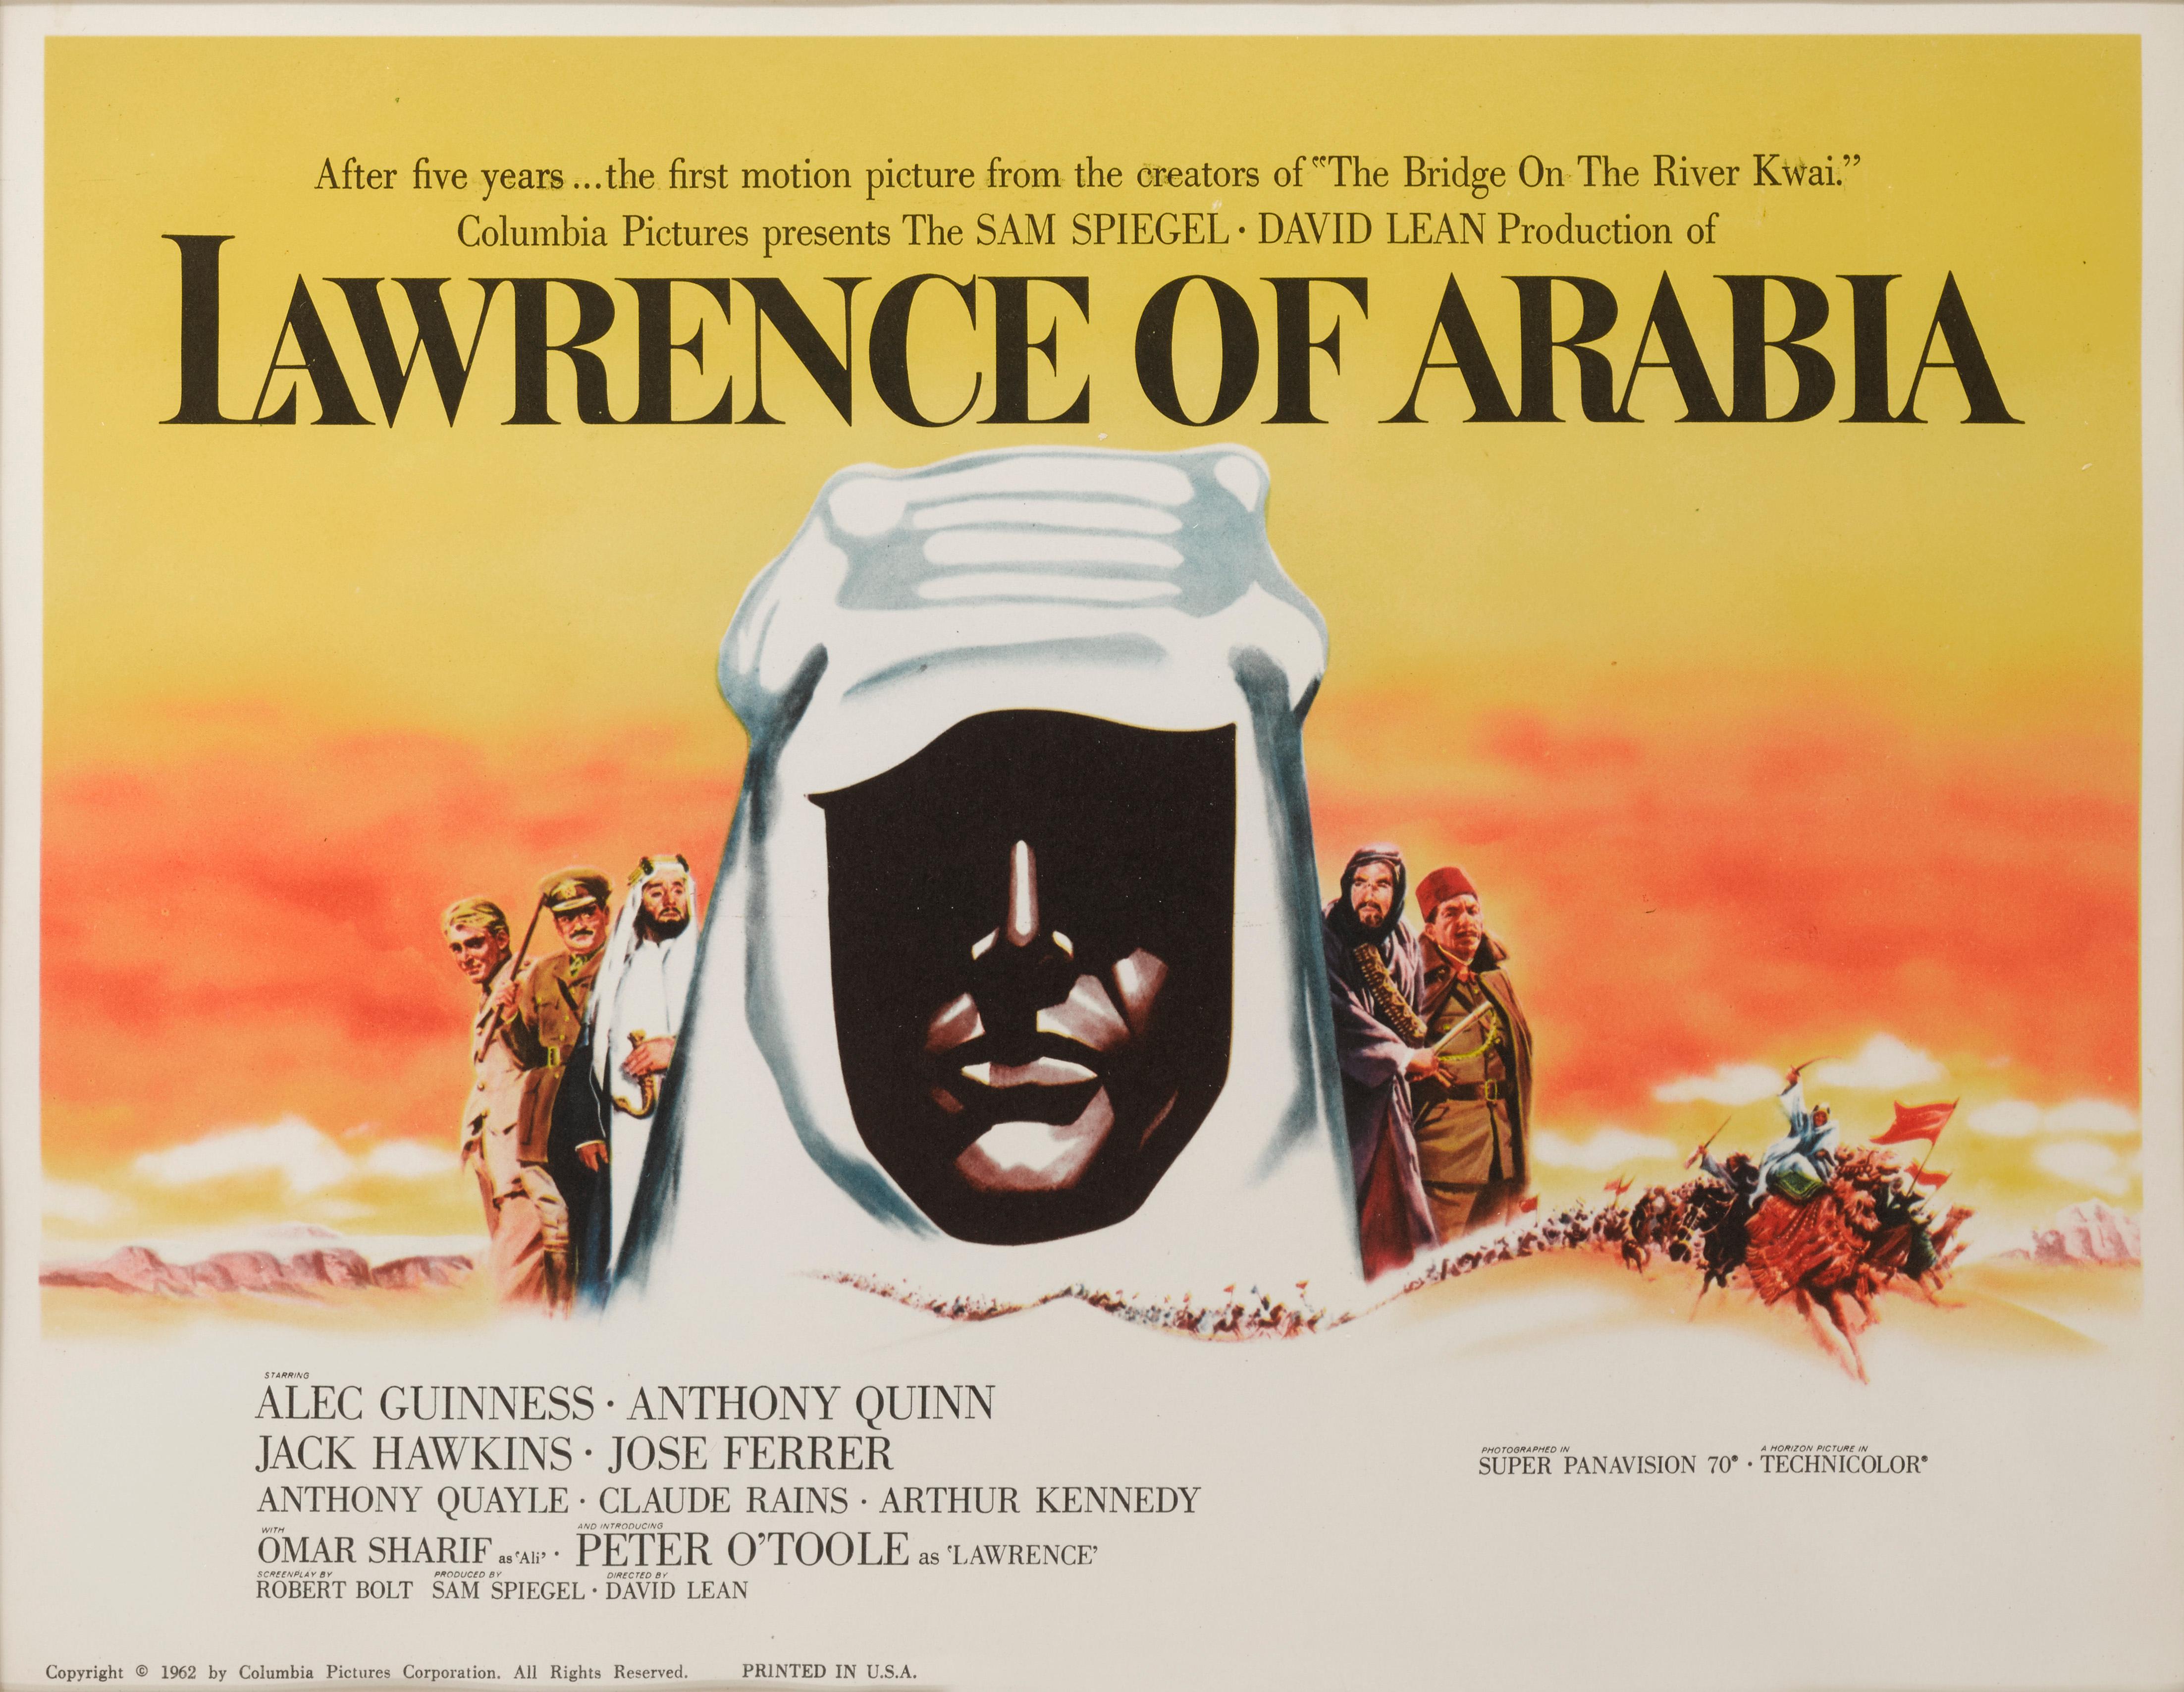 Original American Title lobby card for the films US release in 1962.
This epic British film is based on the life of T. E. Lawrence. It was directed by David Lean and produced by Sam Spiegel. The film stars Peter O'Toole in the title role, together